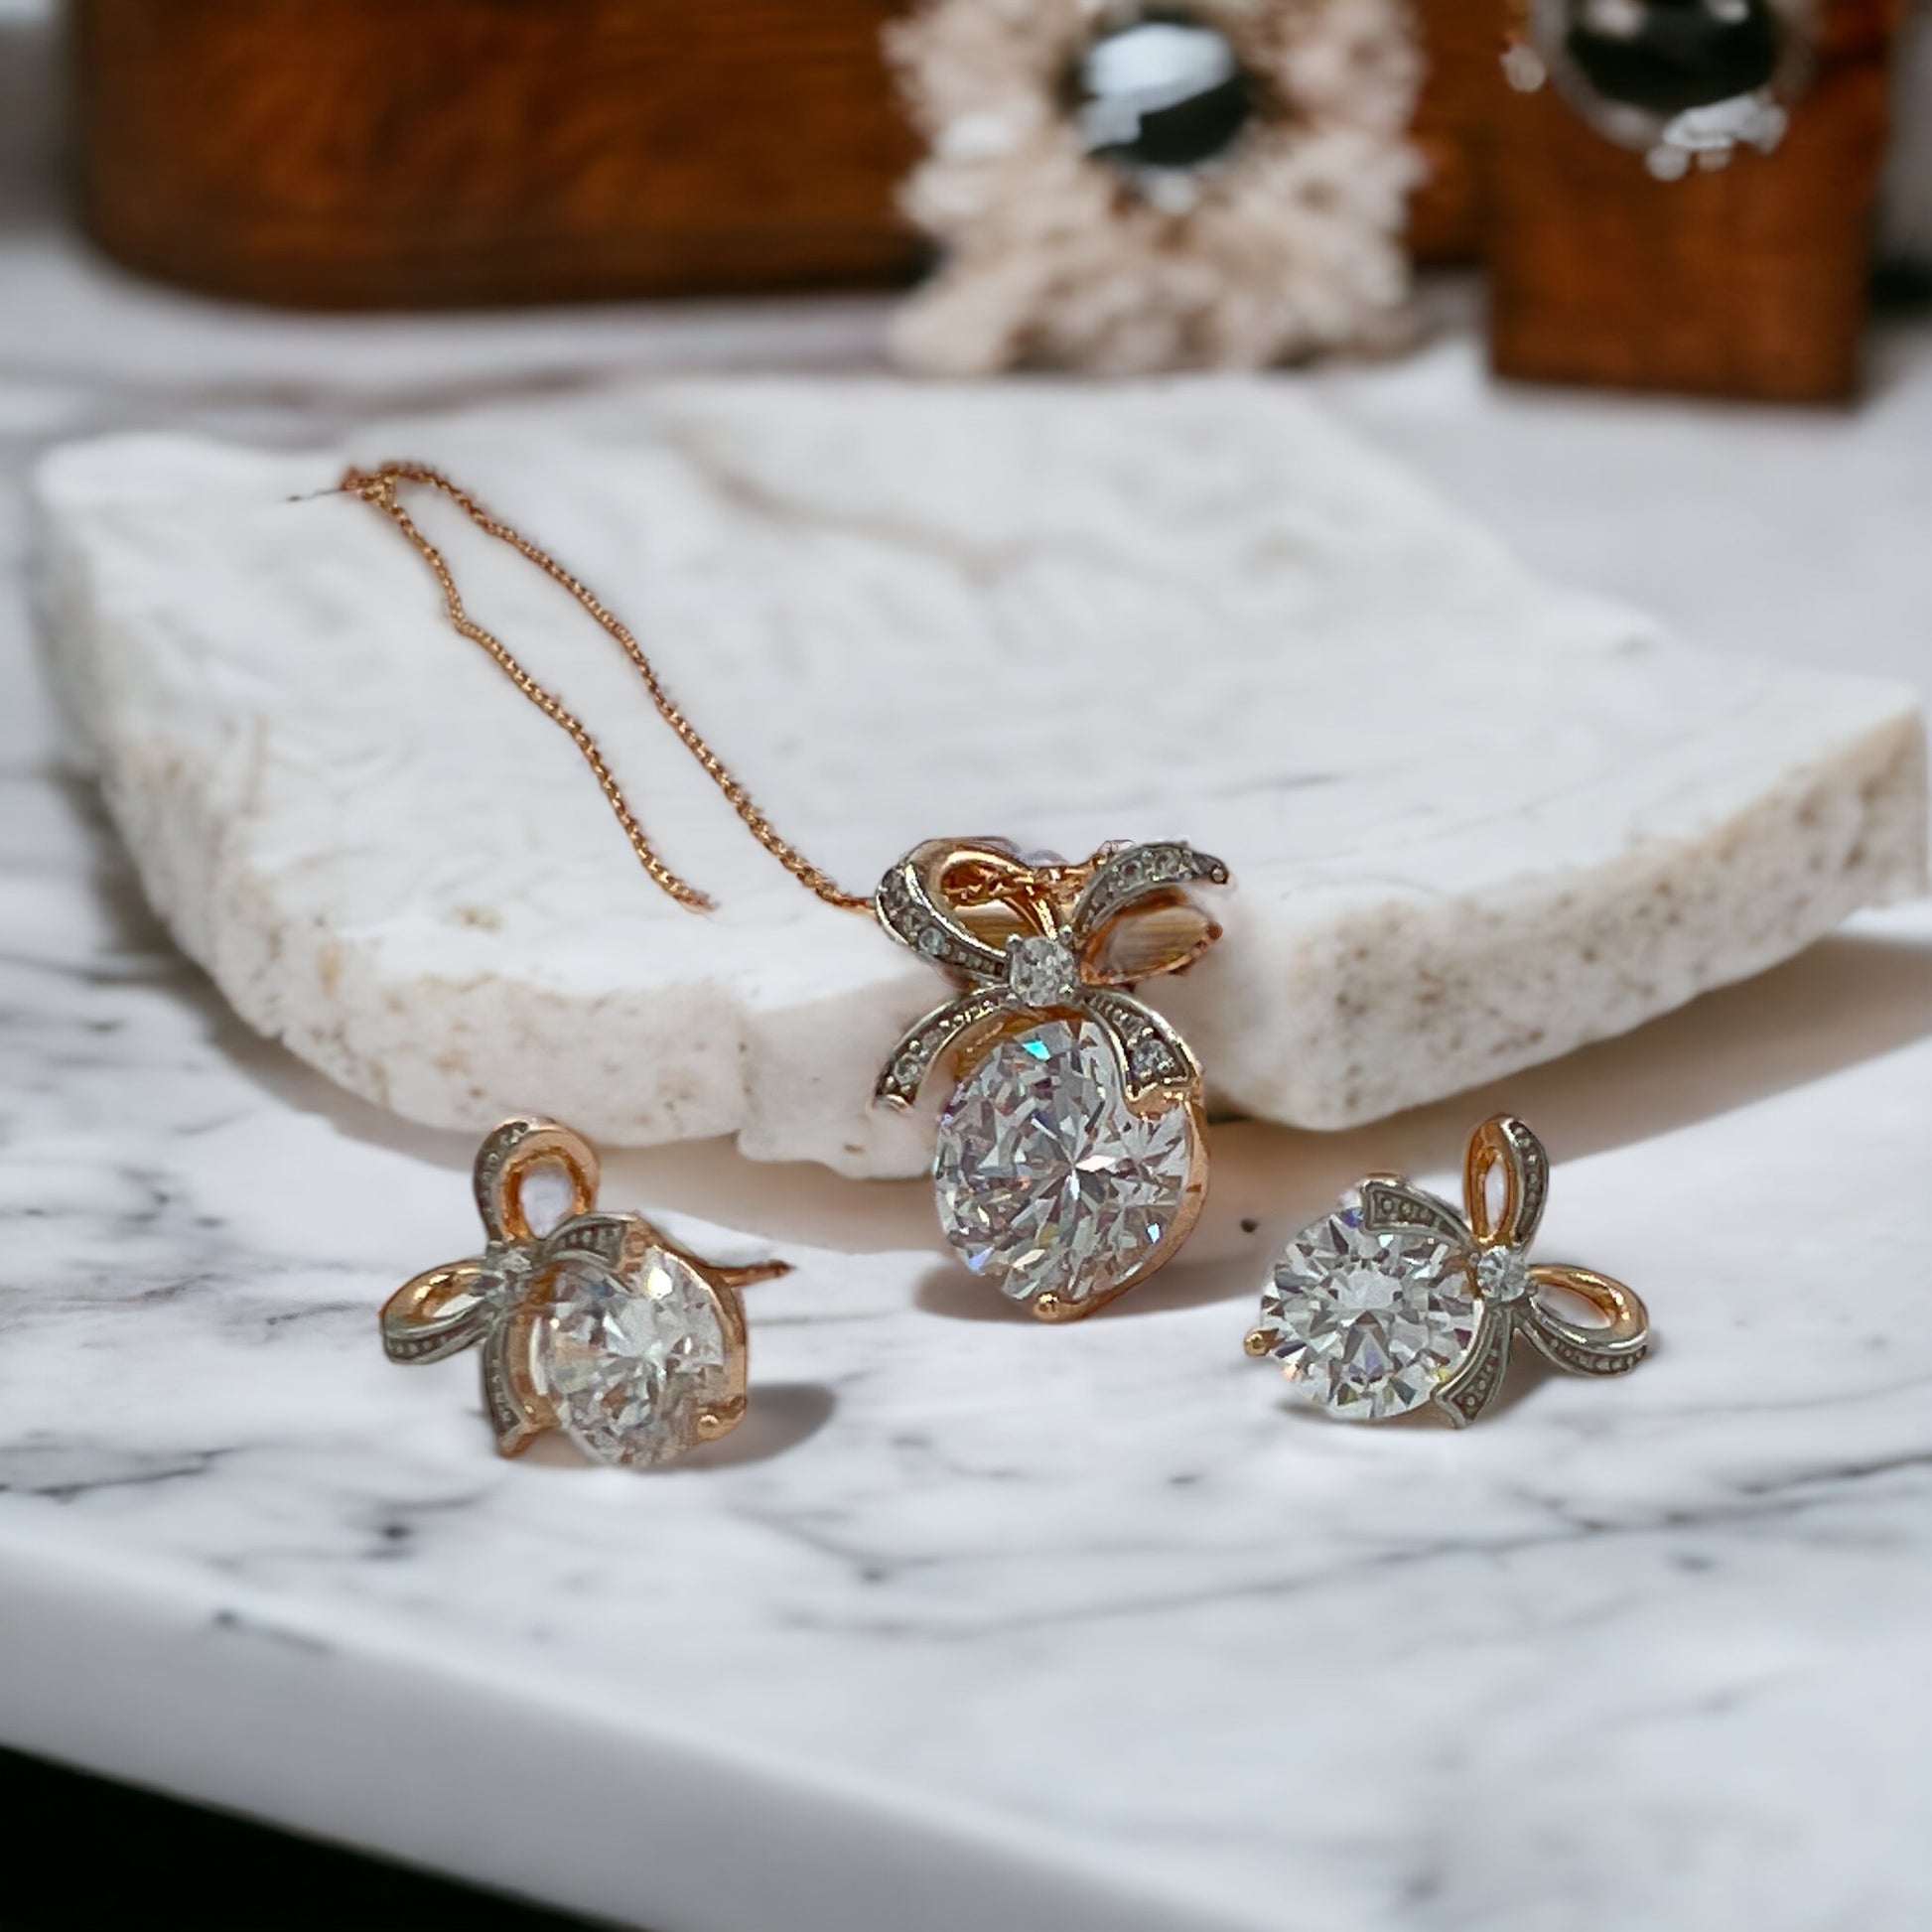 18K Gold-Plated Set, Radiant Elegance, Necklace and Stud Earrings, 5A Cubic Zircons, Timeless Sophistication, Hypoallergenic, Nickel-Free, Coordinated Ensemble.